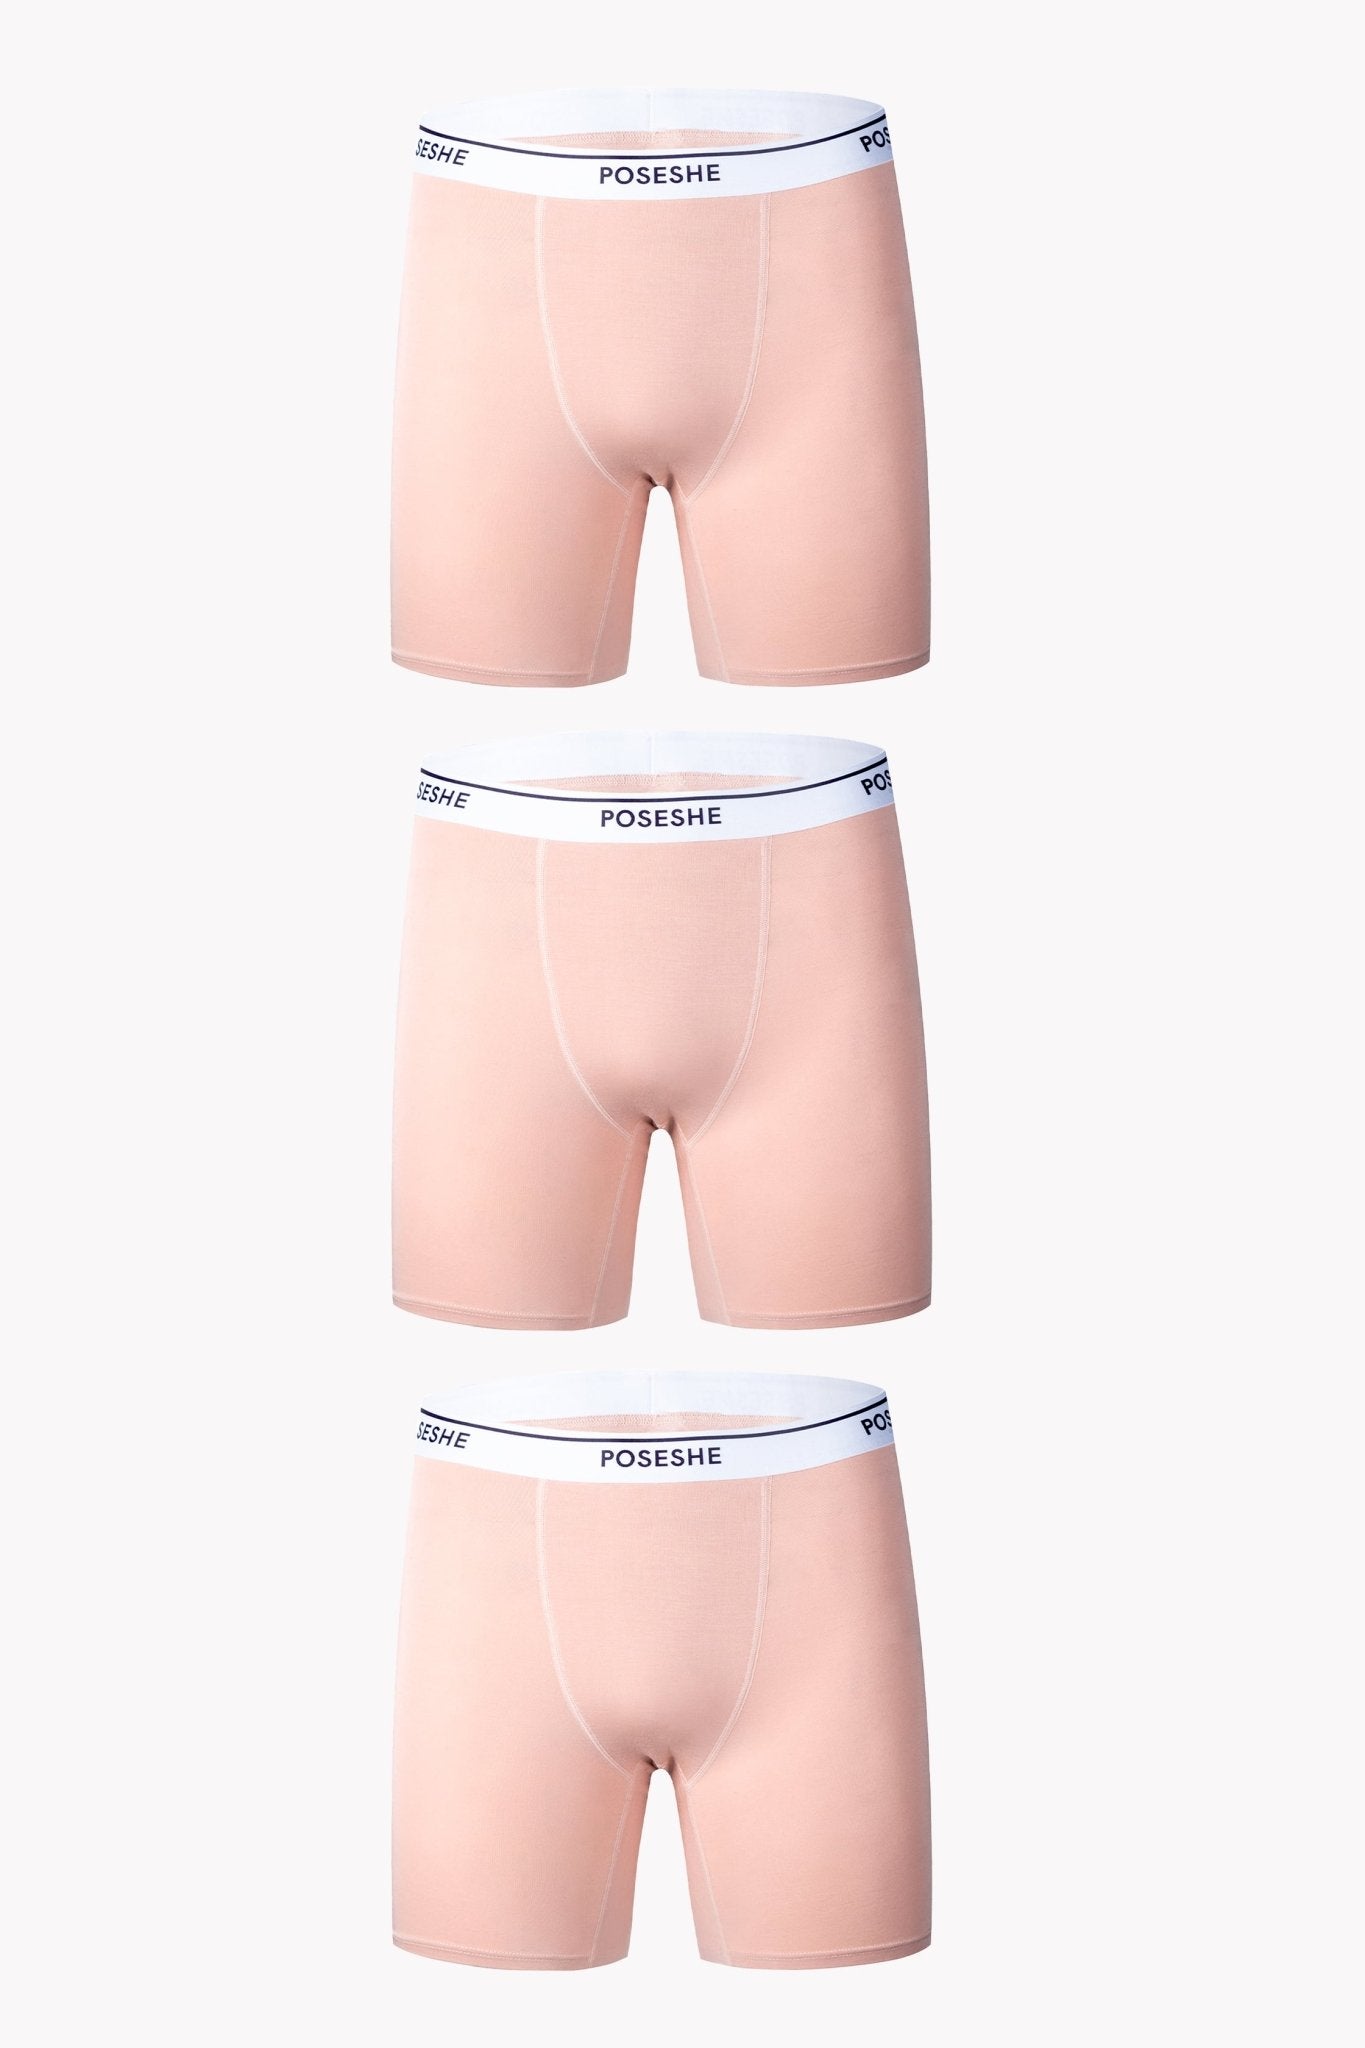 POSESHE High-Waisted Women Boxer Underwear (Period Friendly) 3 Pack